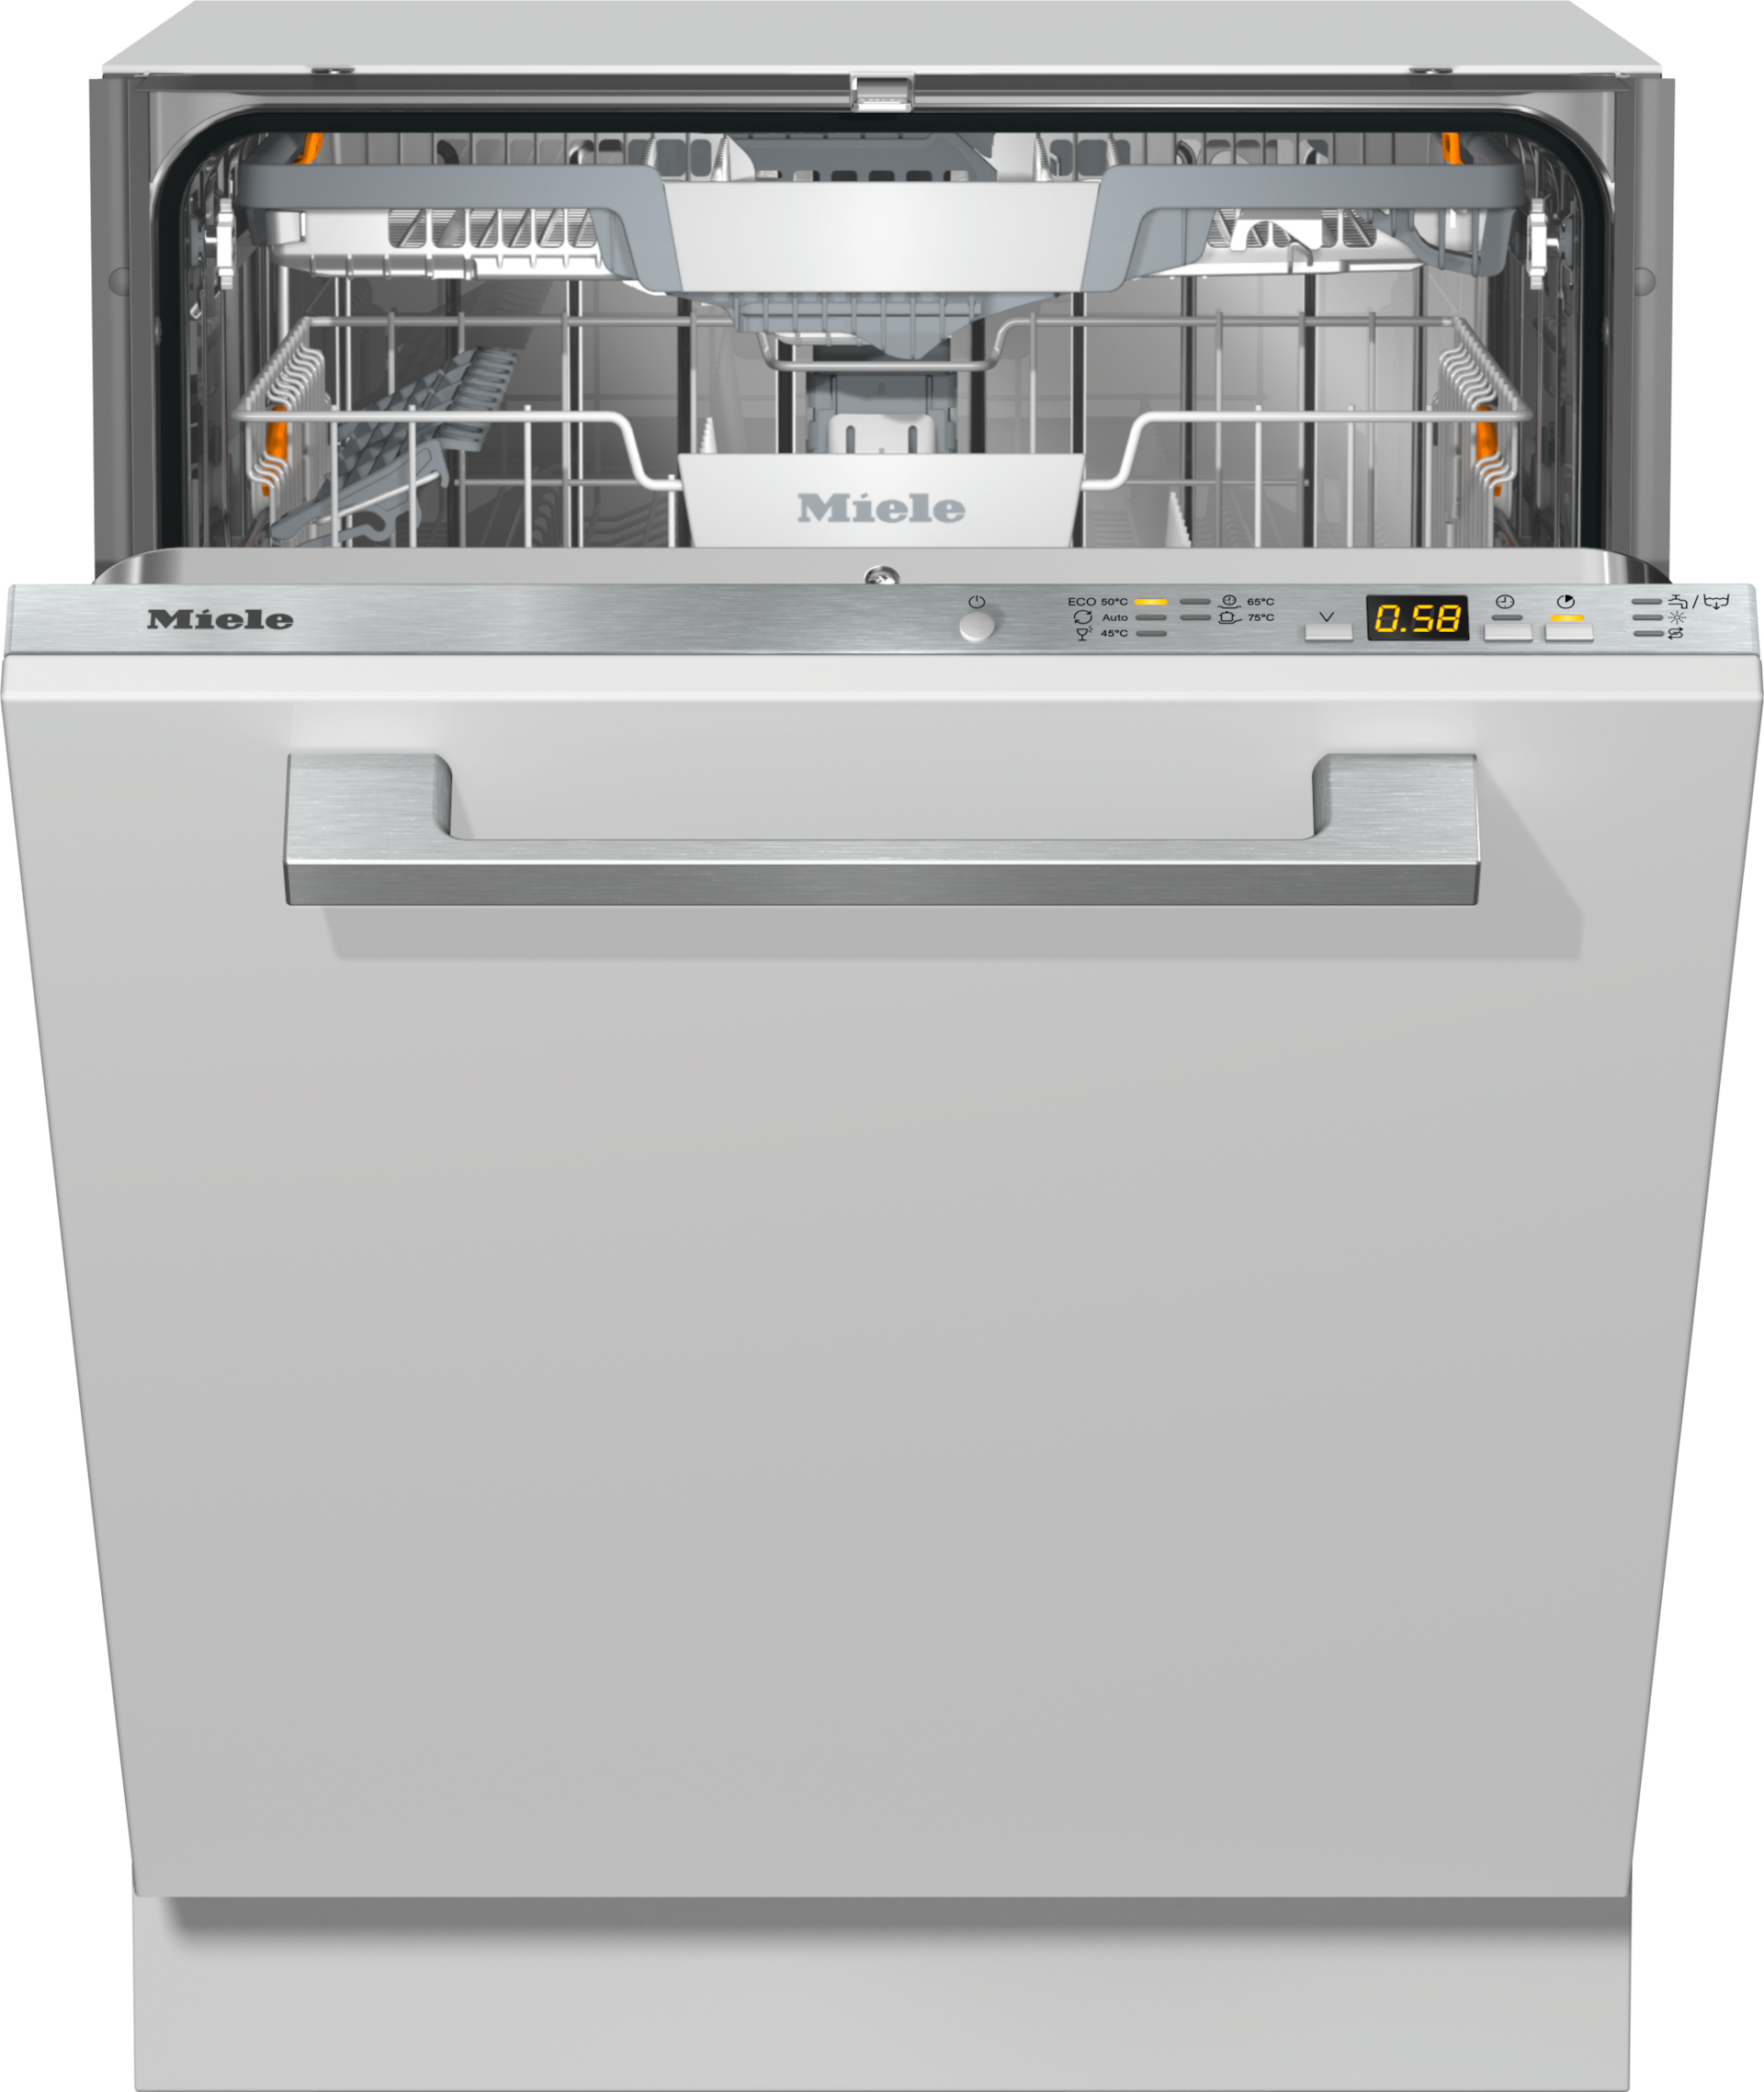 Dishwashers - G 5260 SCVi Active Plus Stainless Steel. - 1